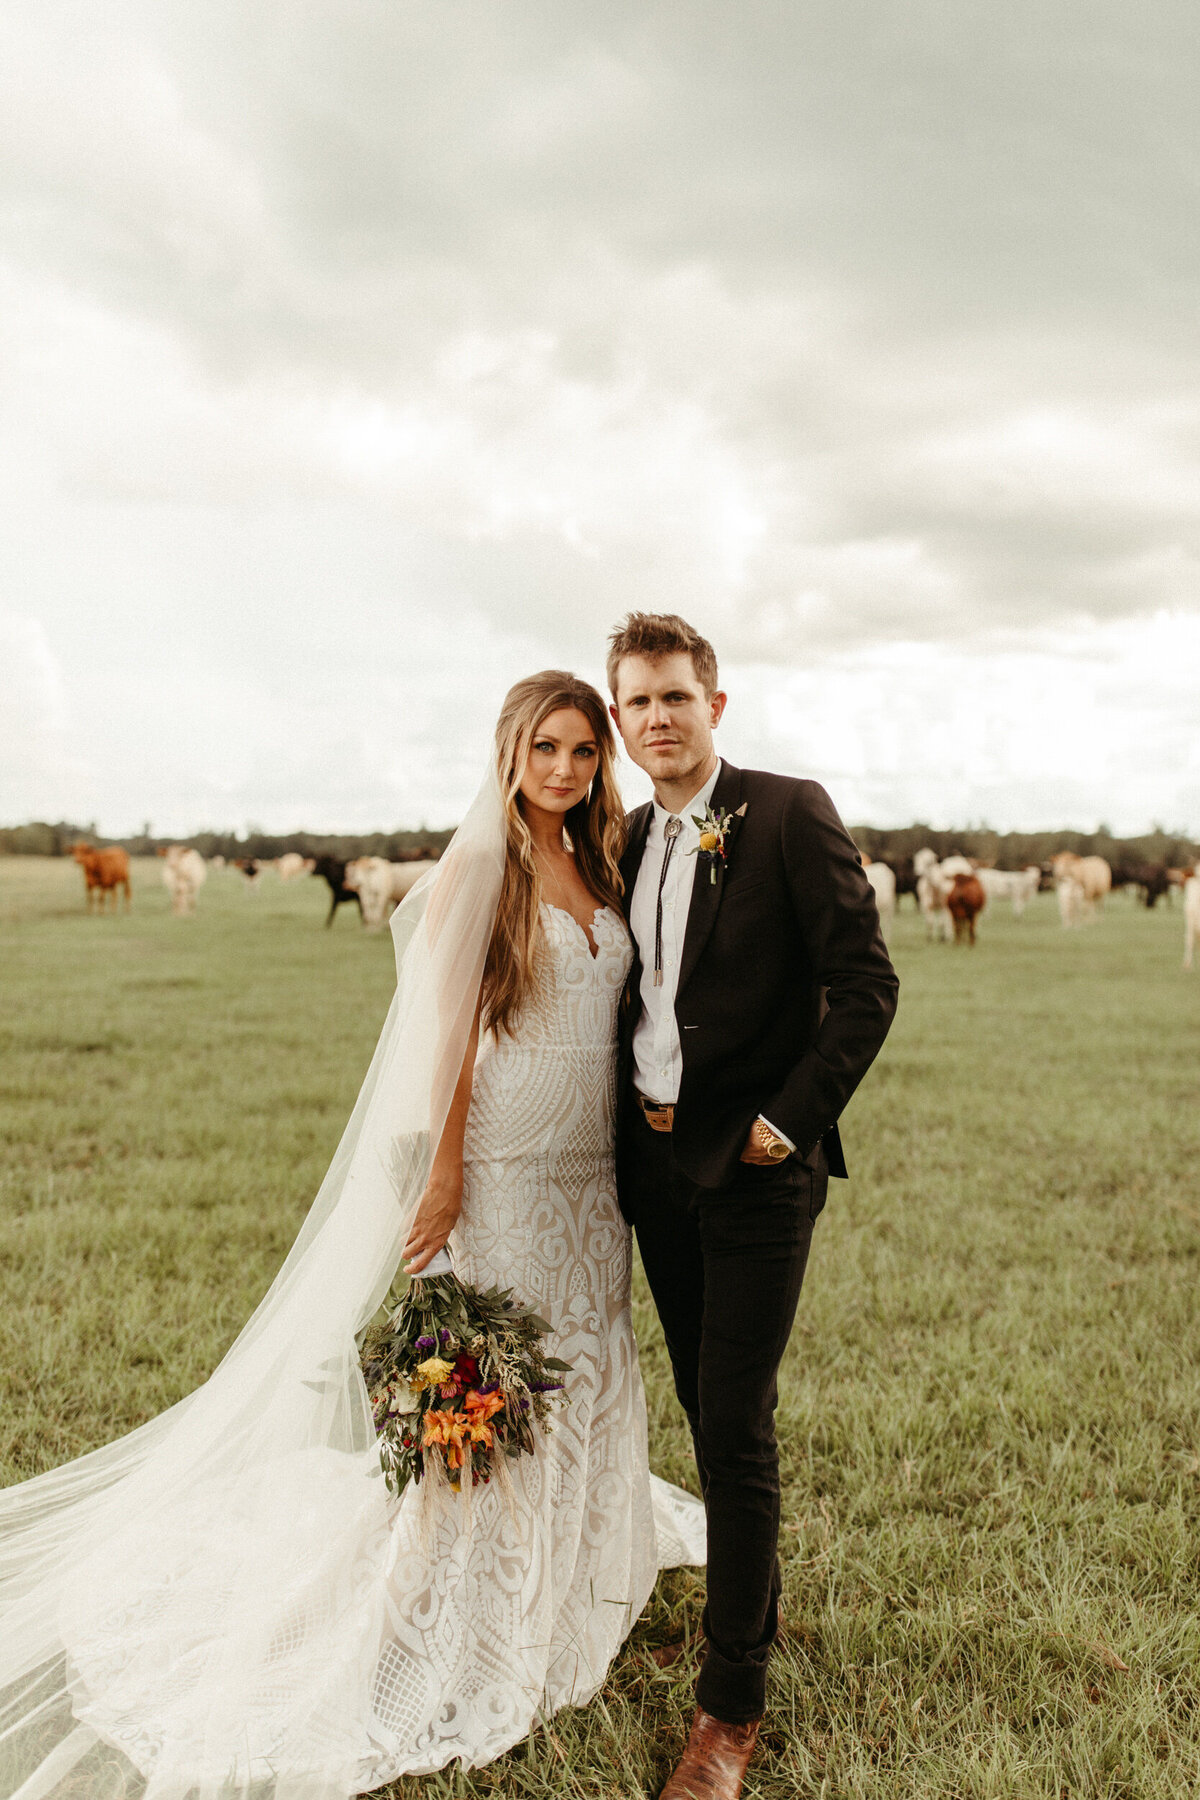 Bride with cathedral veil holding bouquet and standing next to her boho groom with bolo tie and black suit standing in a field with cows behind them